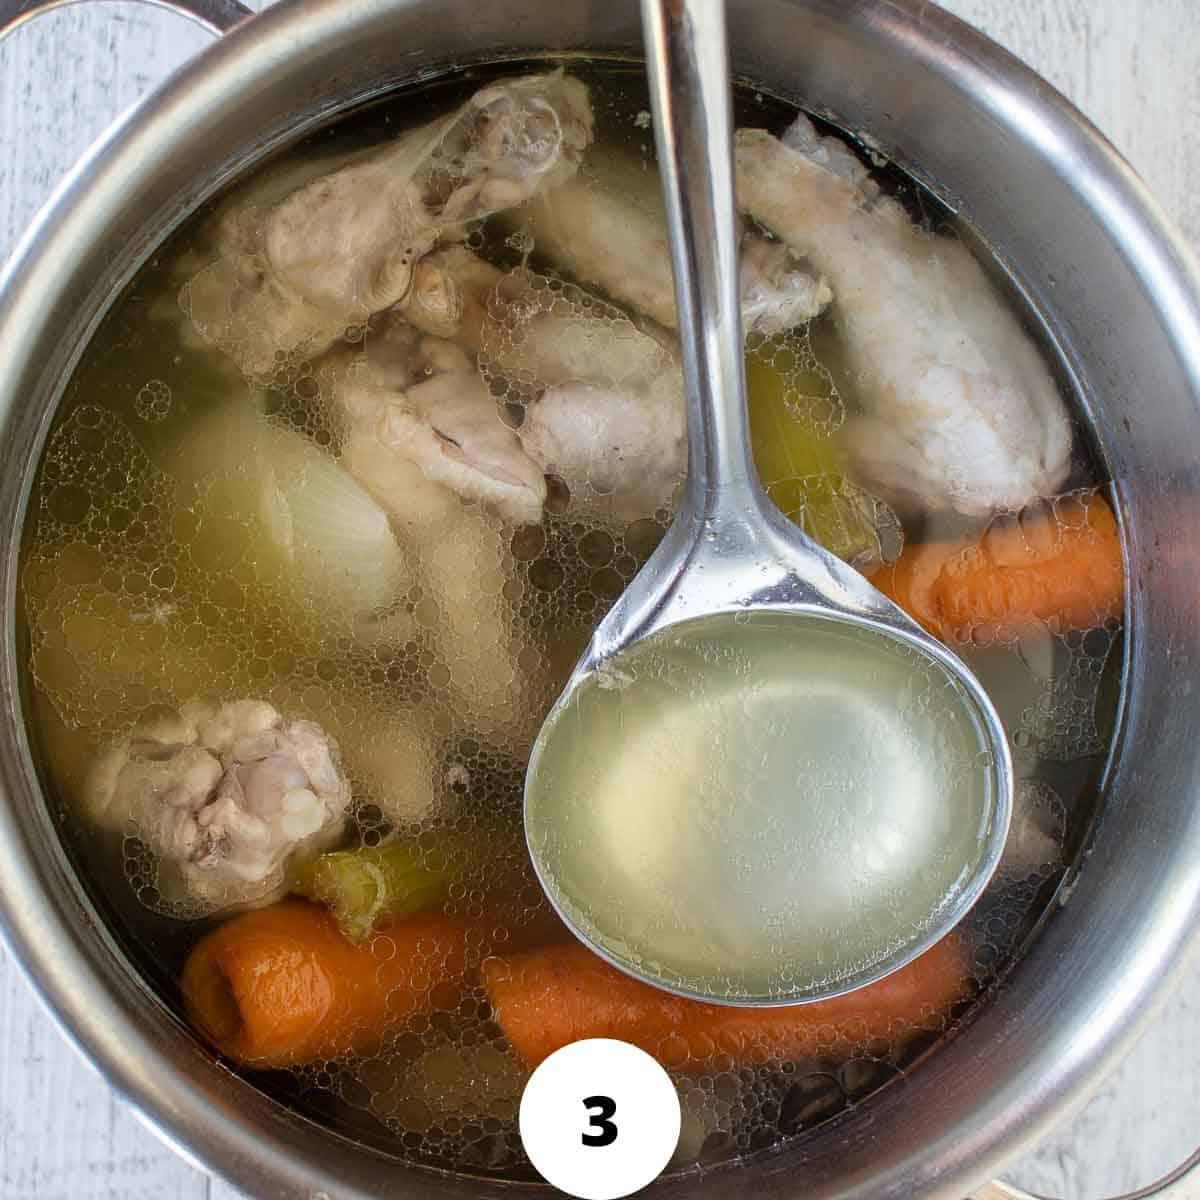 Ladling chicken broth from the pot.